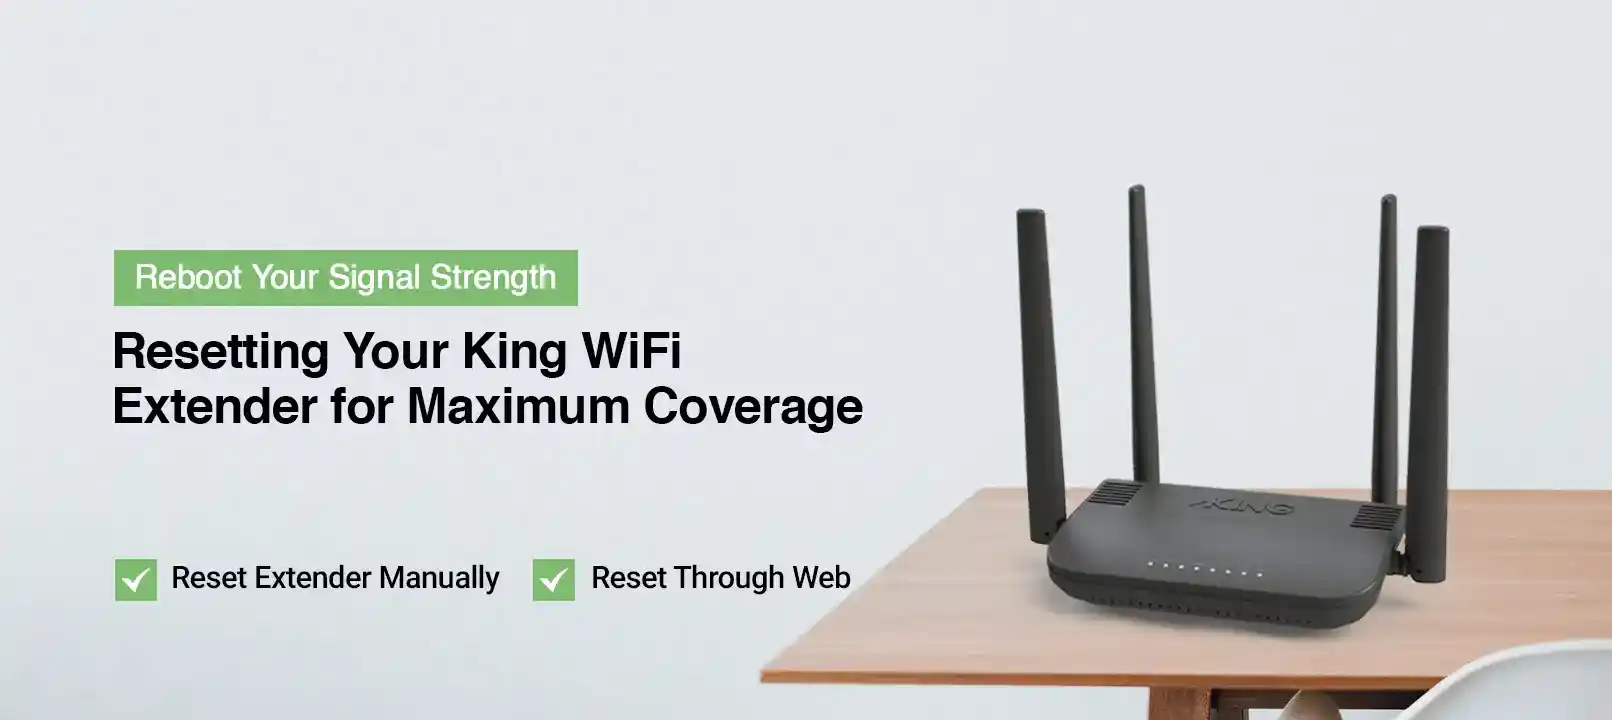 How to Reset King WiFi Extender